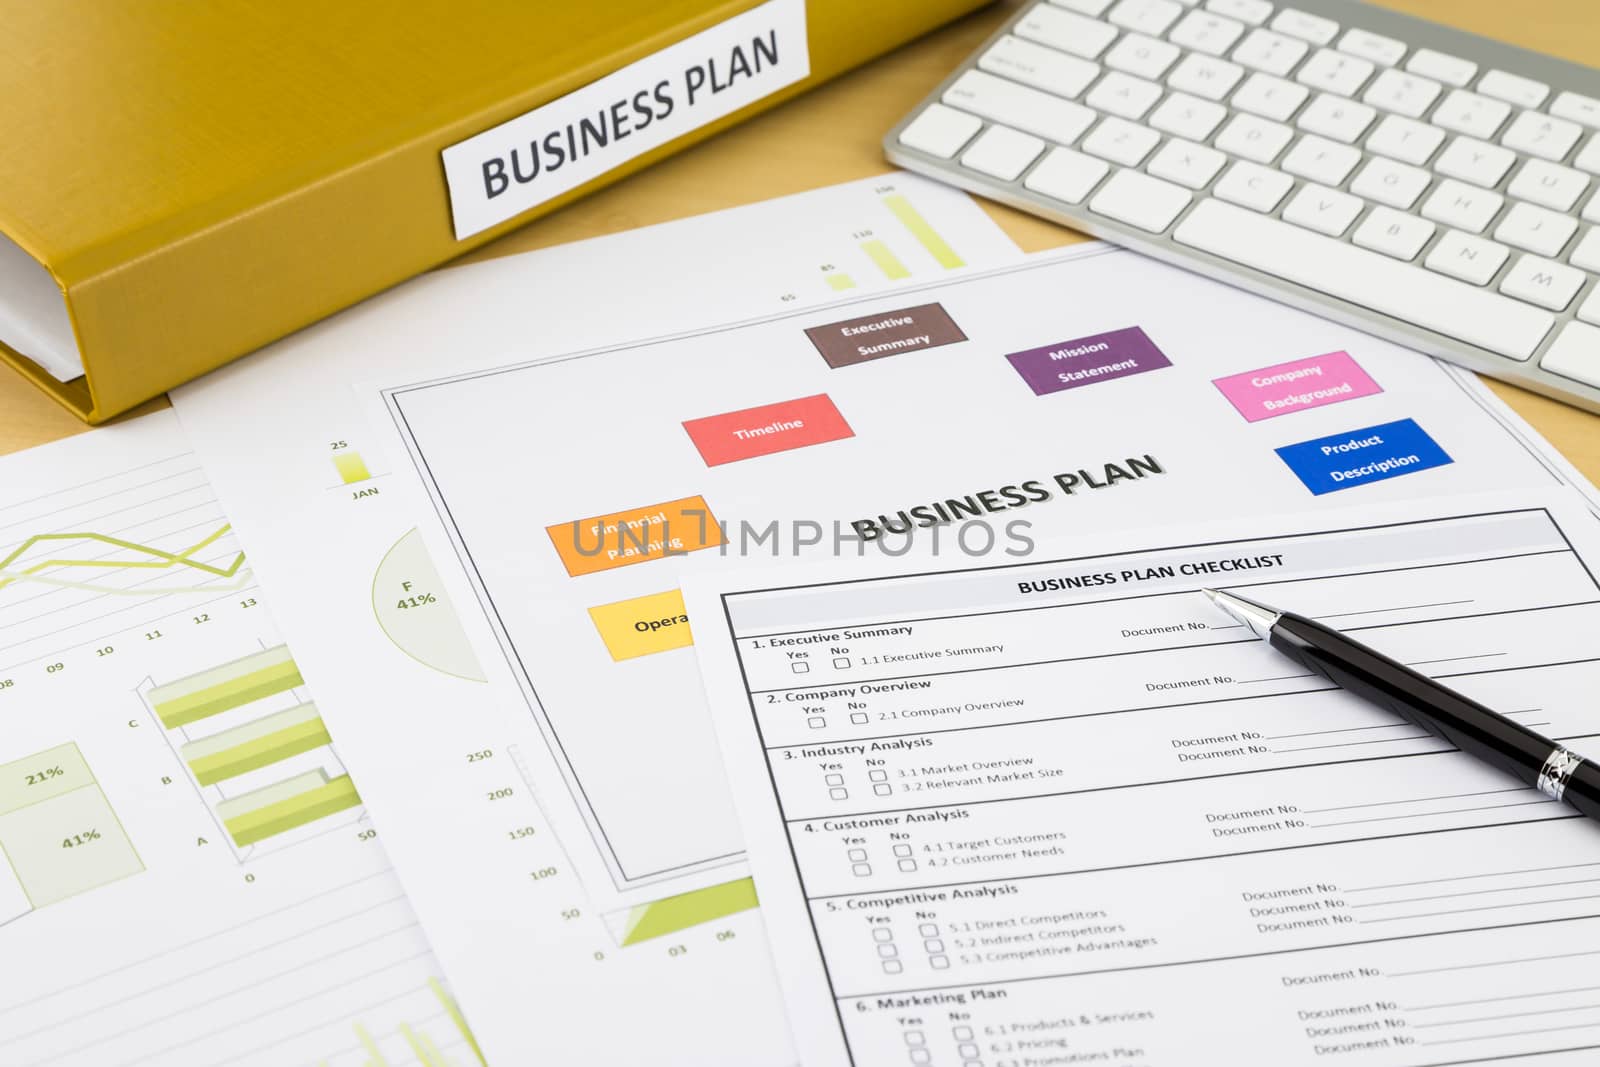 Business plan checklist and documents by vinnstock